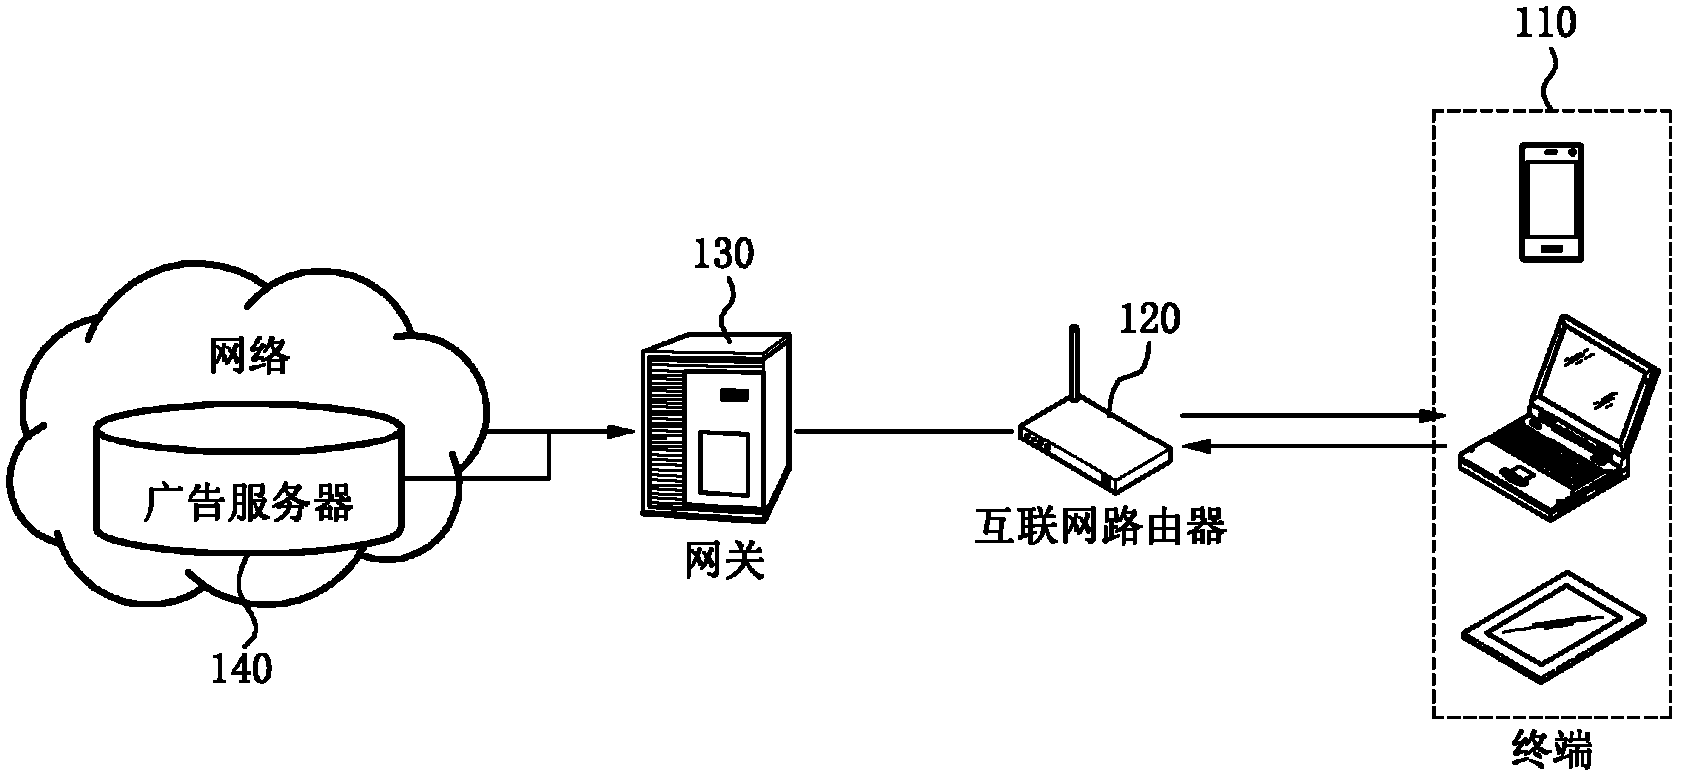 Communication system and method for controlling network access through access point by using advertisement